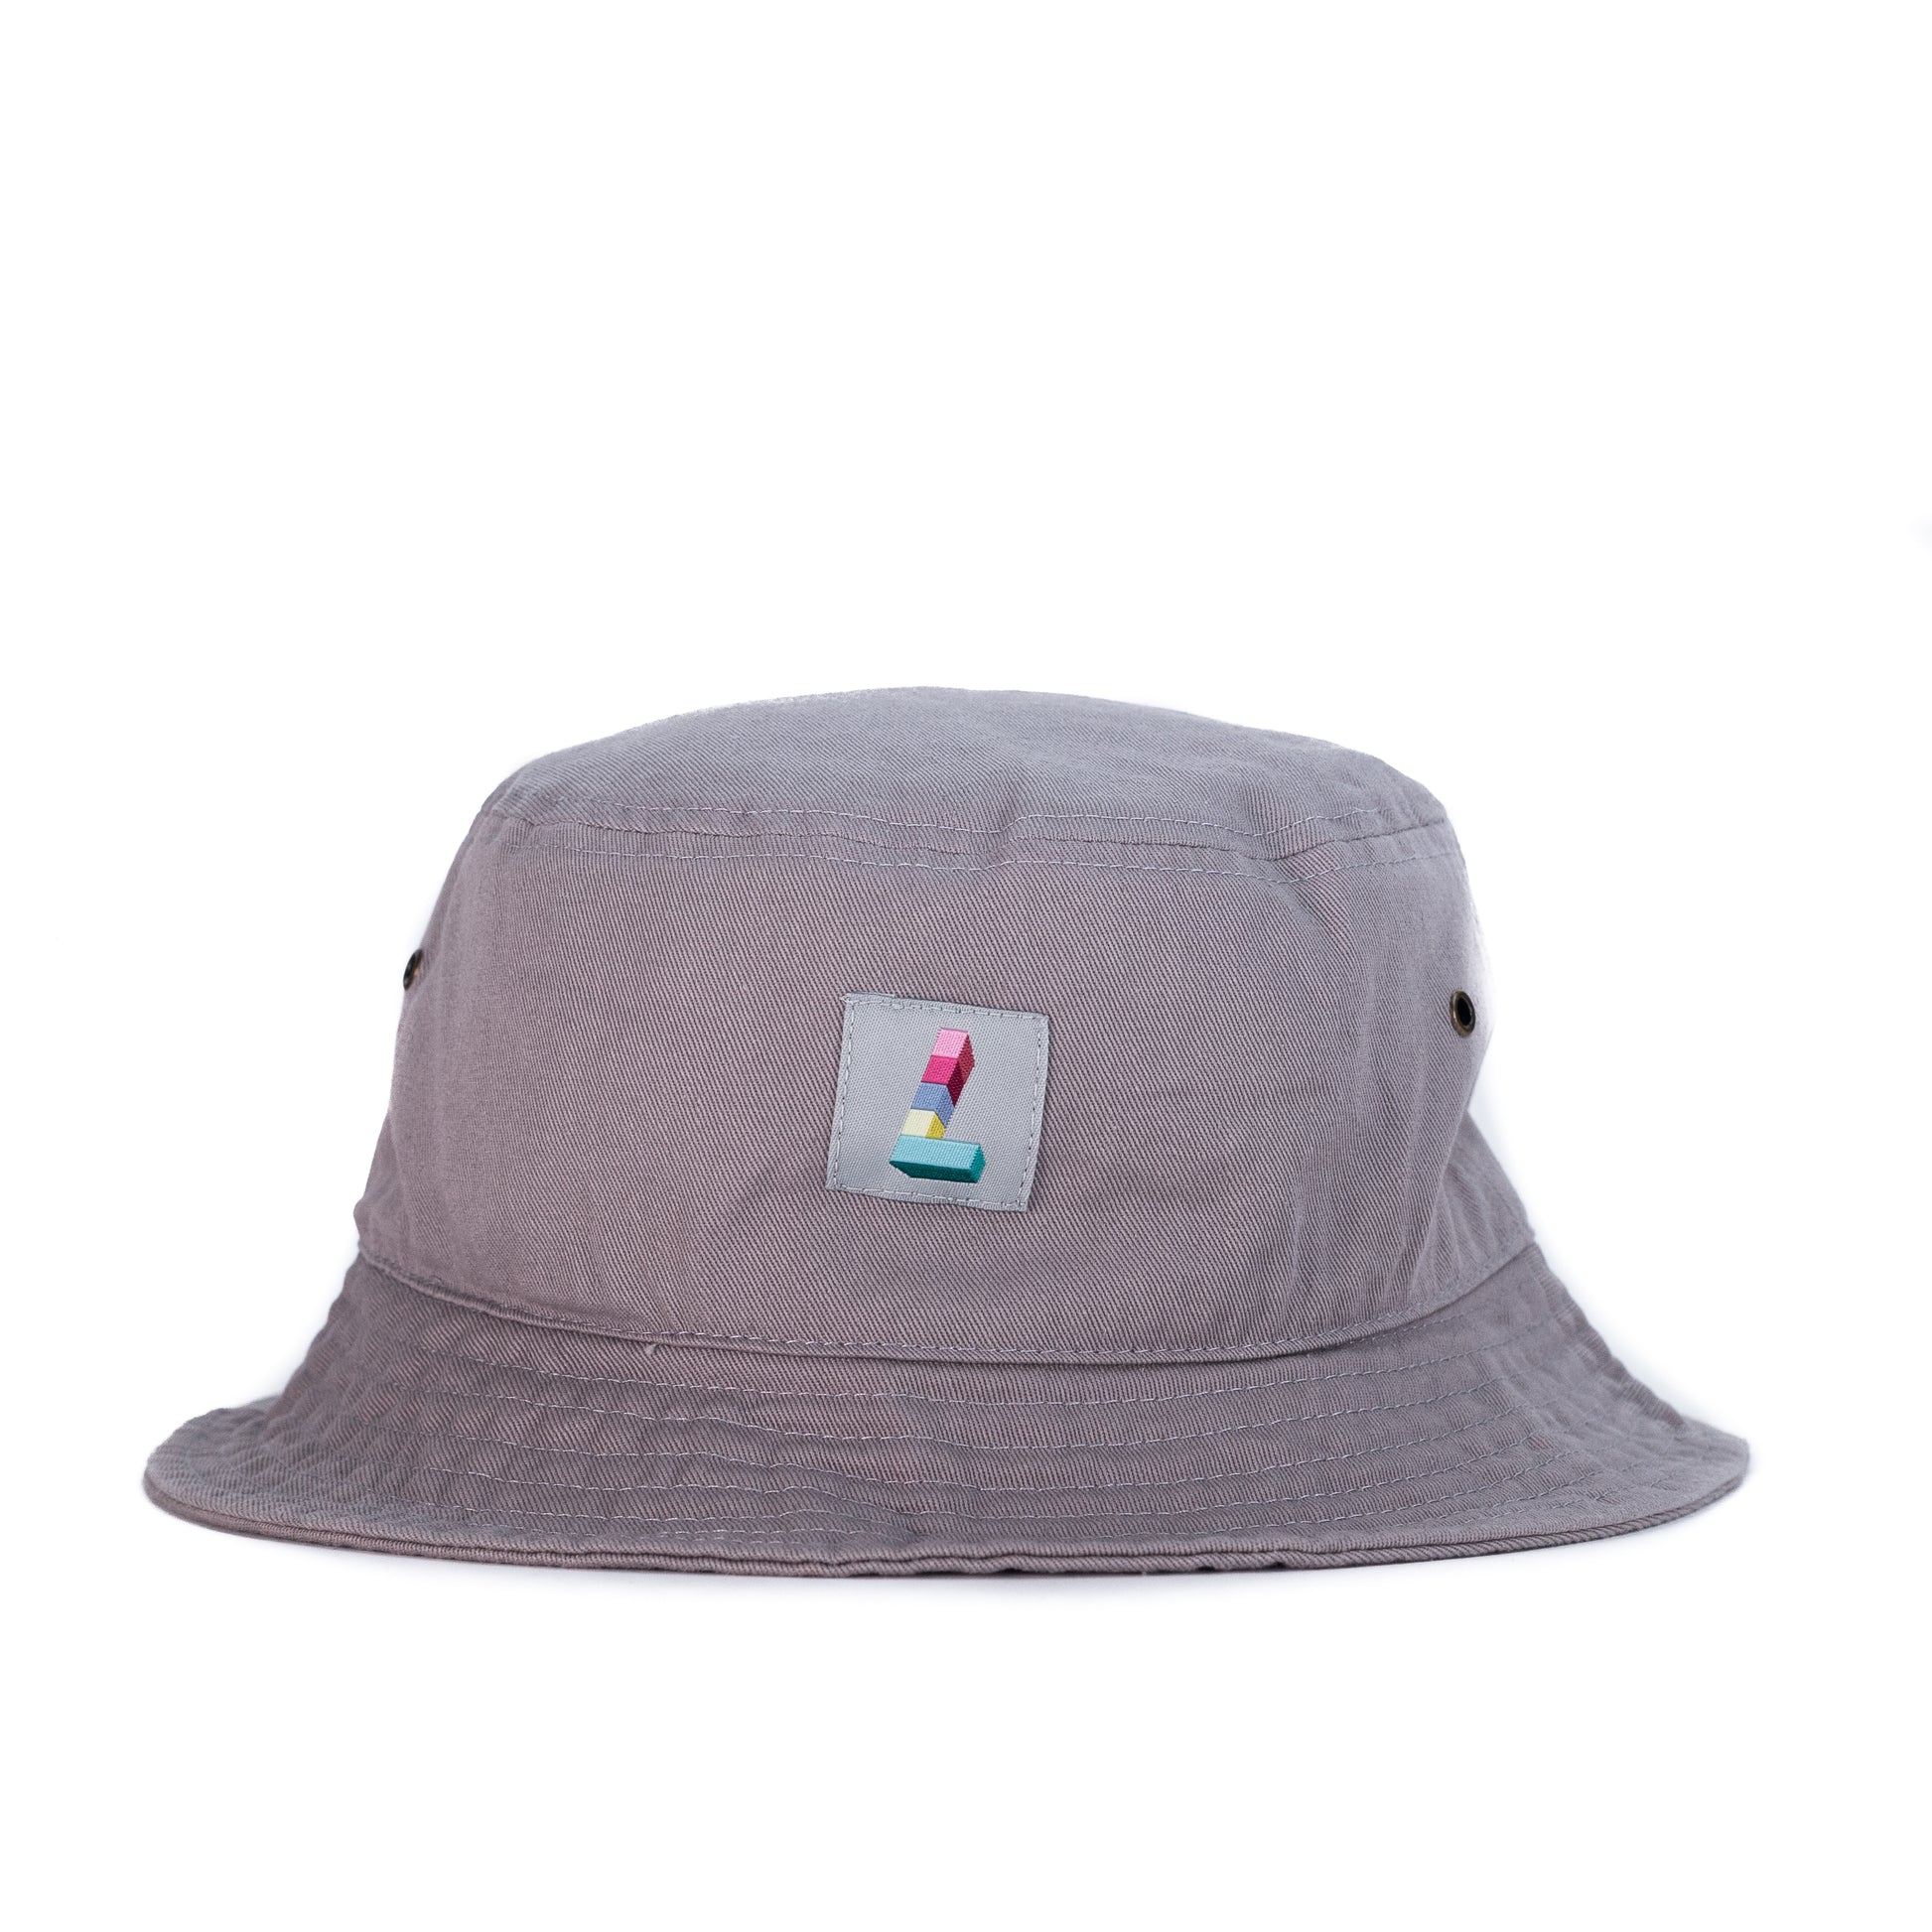 Work Patch Bucket, Light Grey - Layr Official